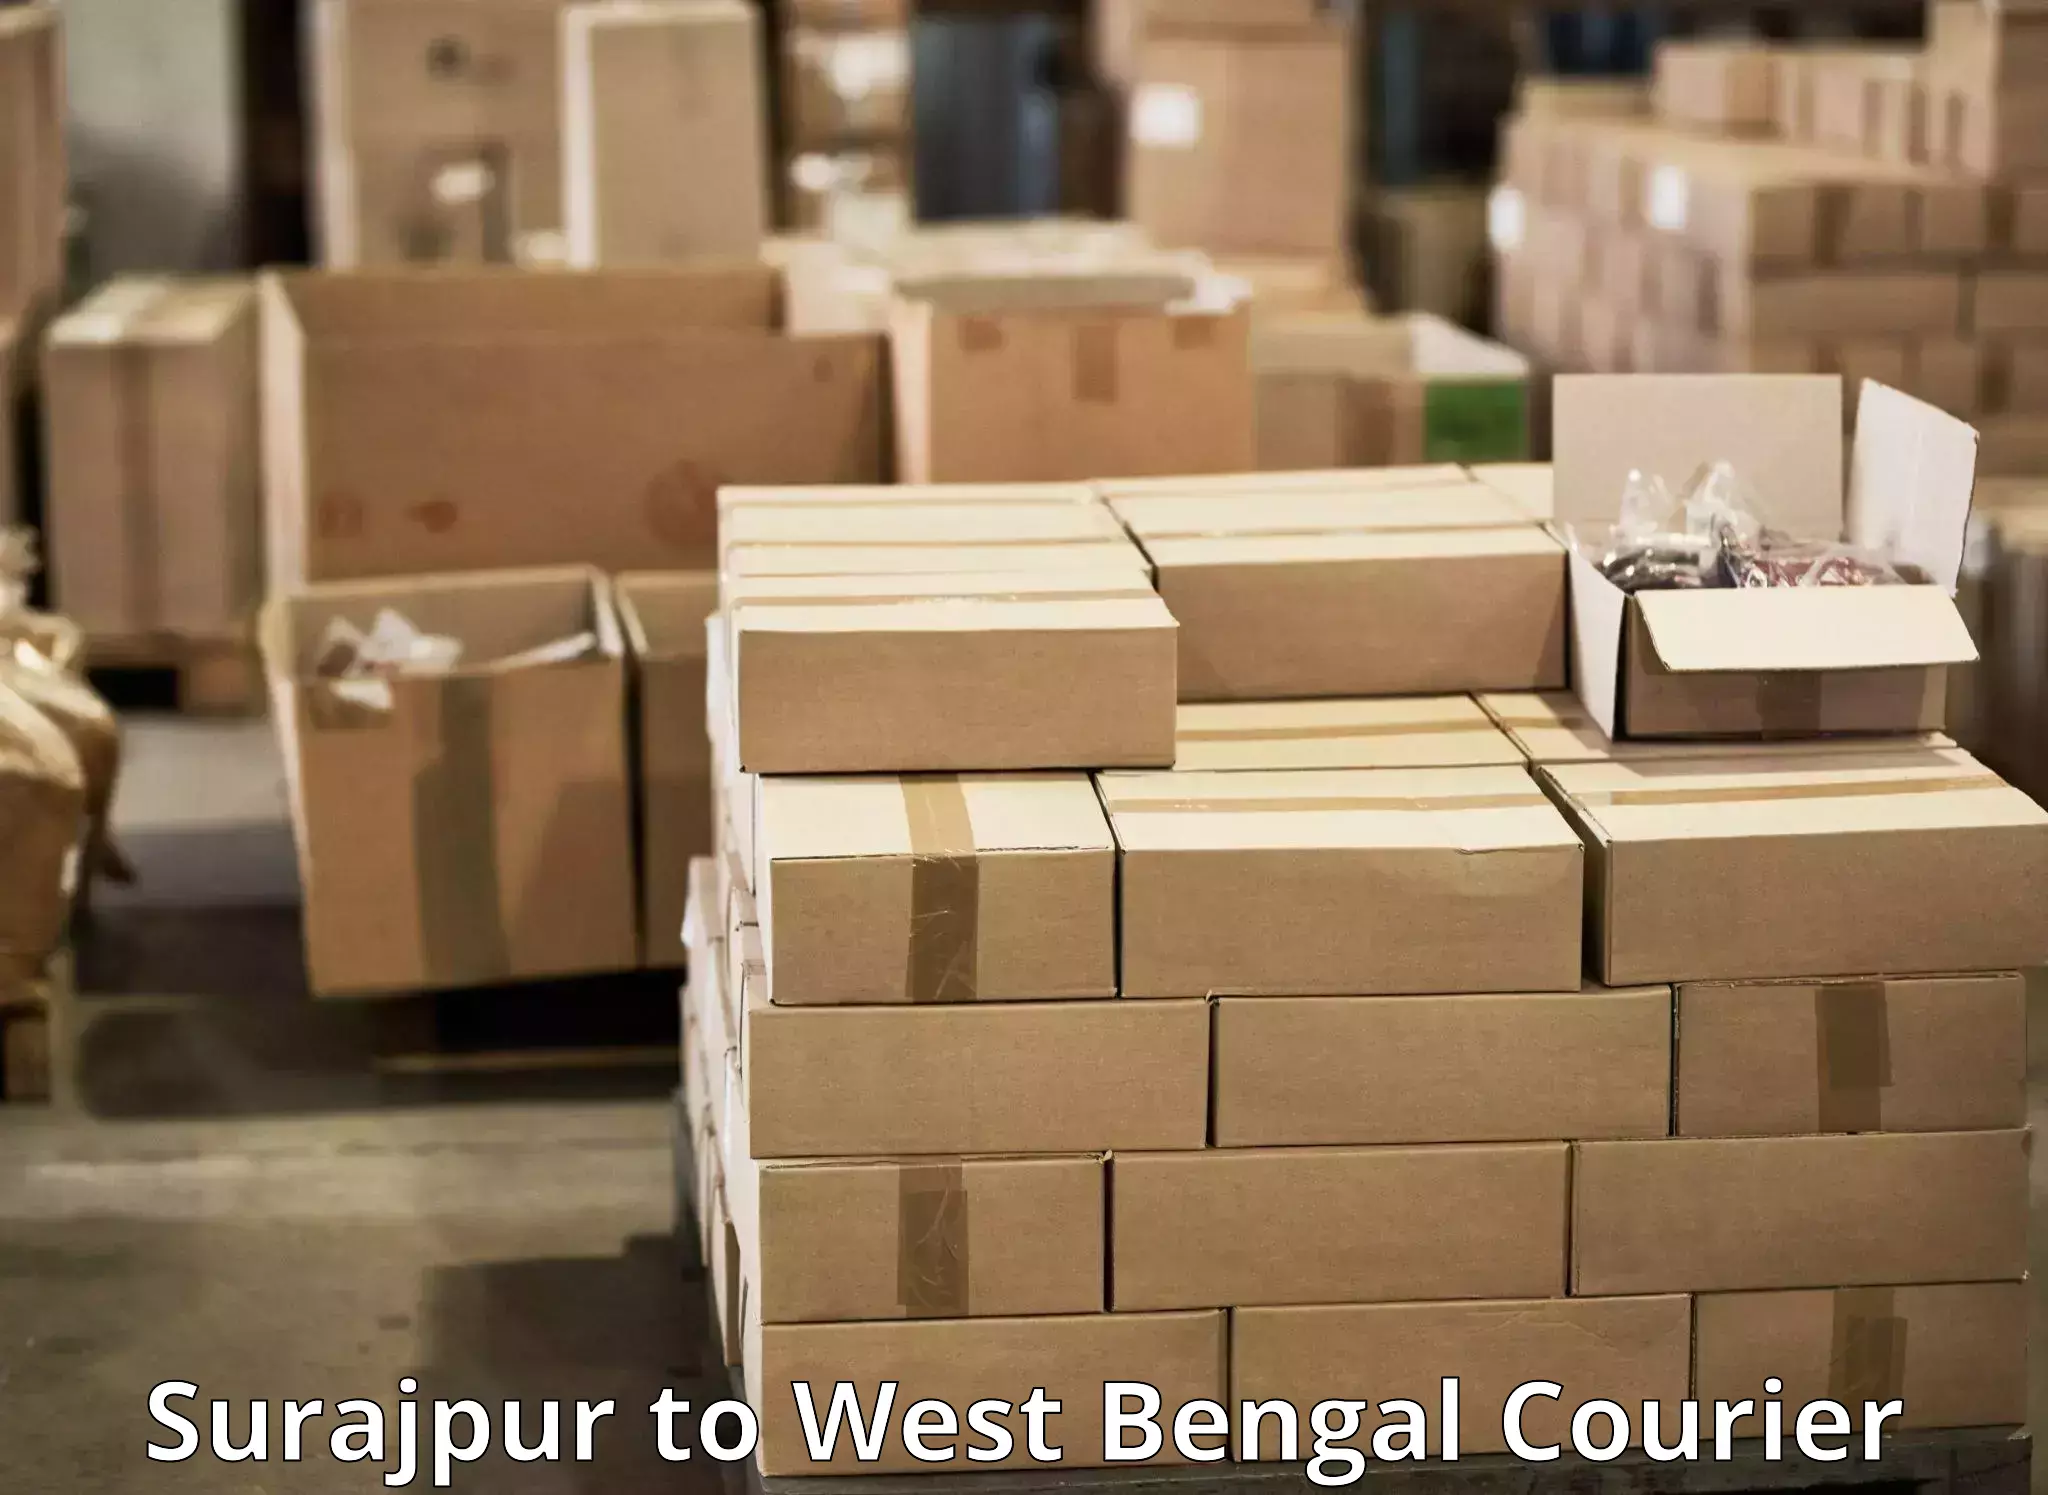 Global shipping networks Surajpur to West Bengal